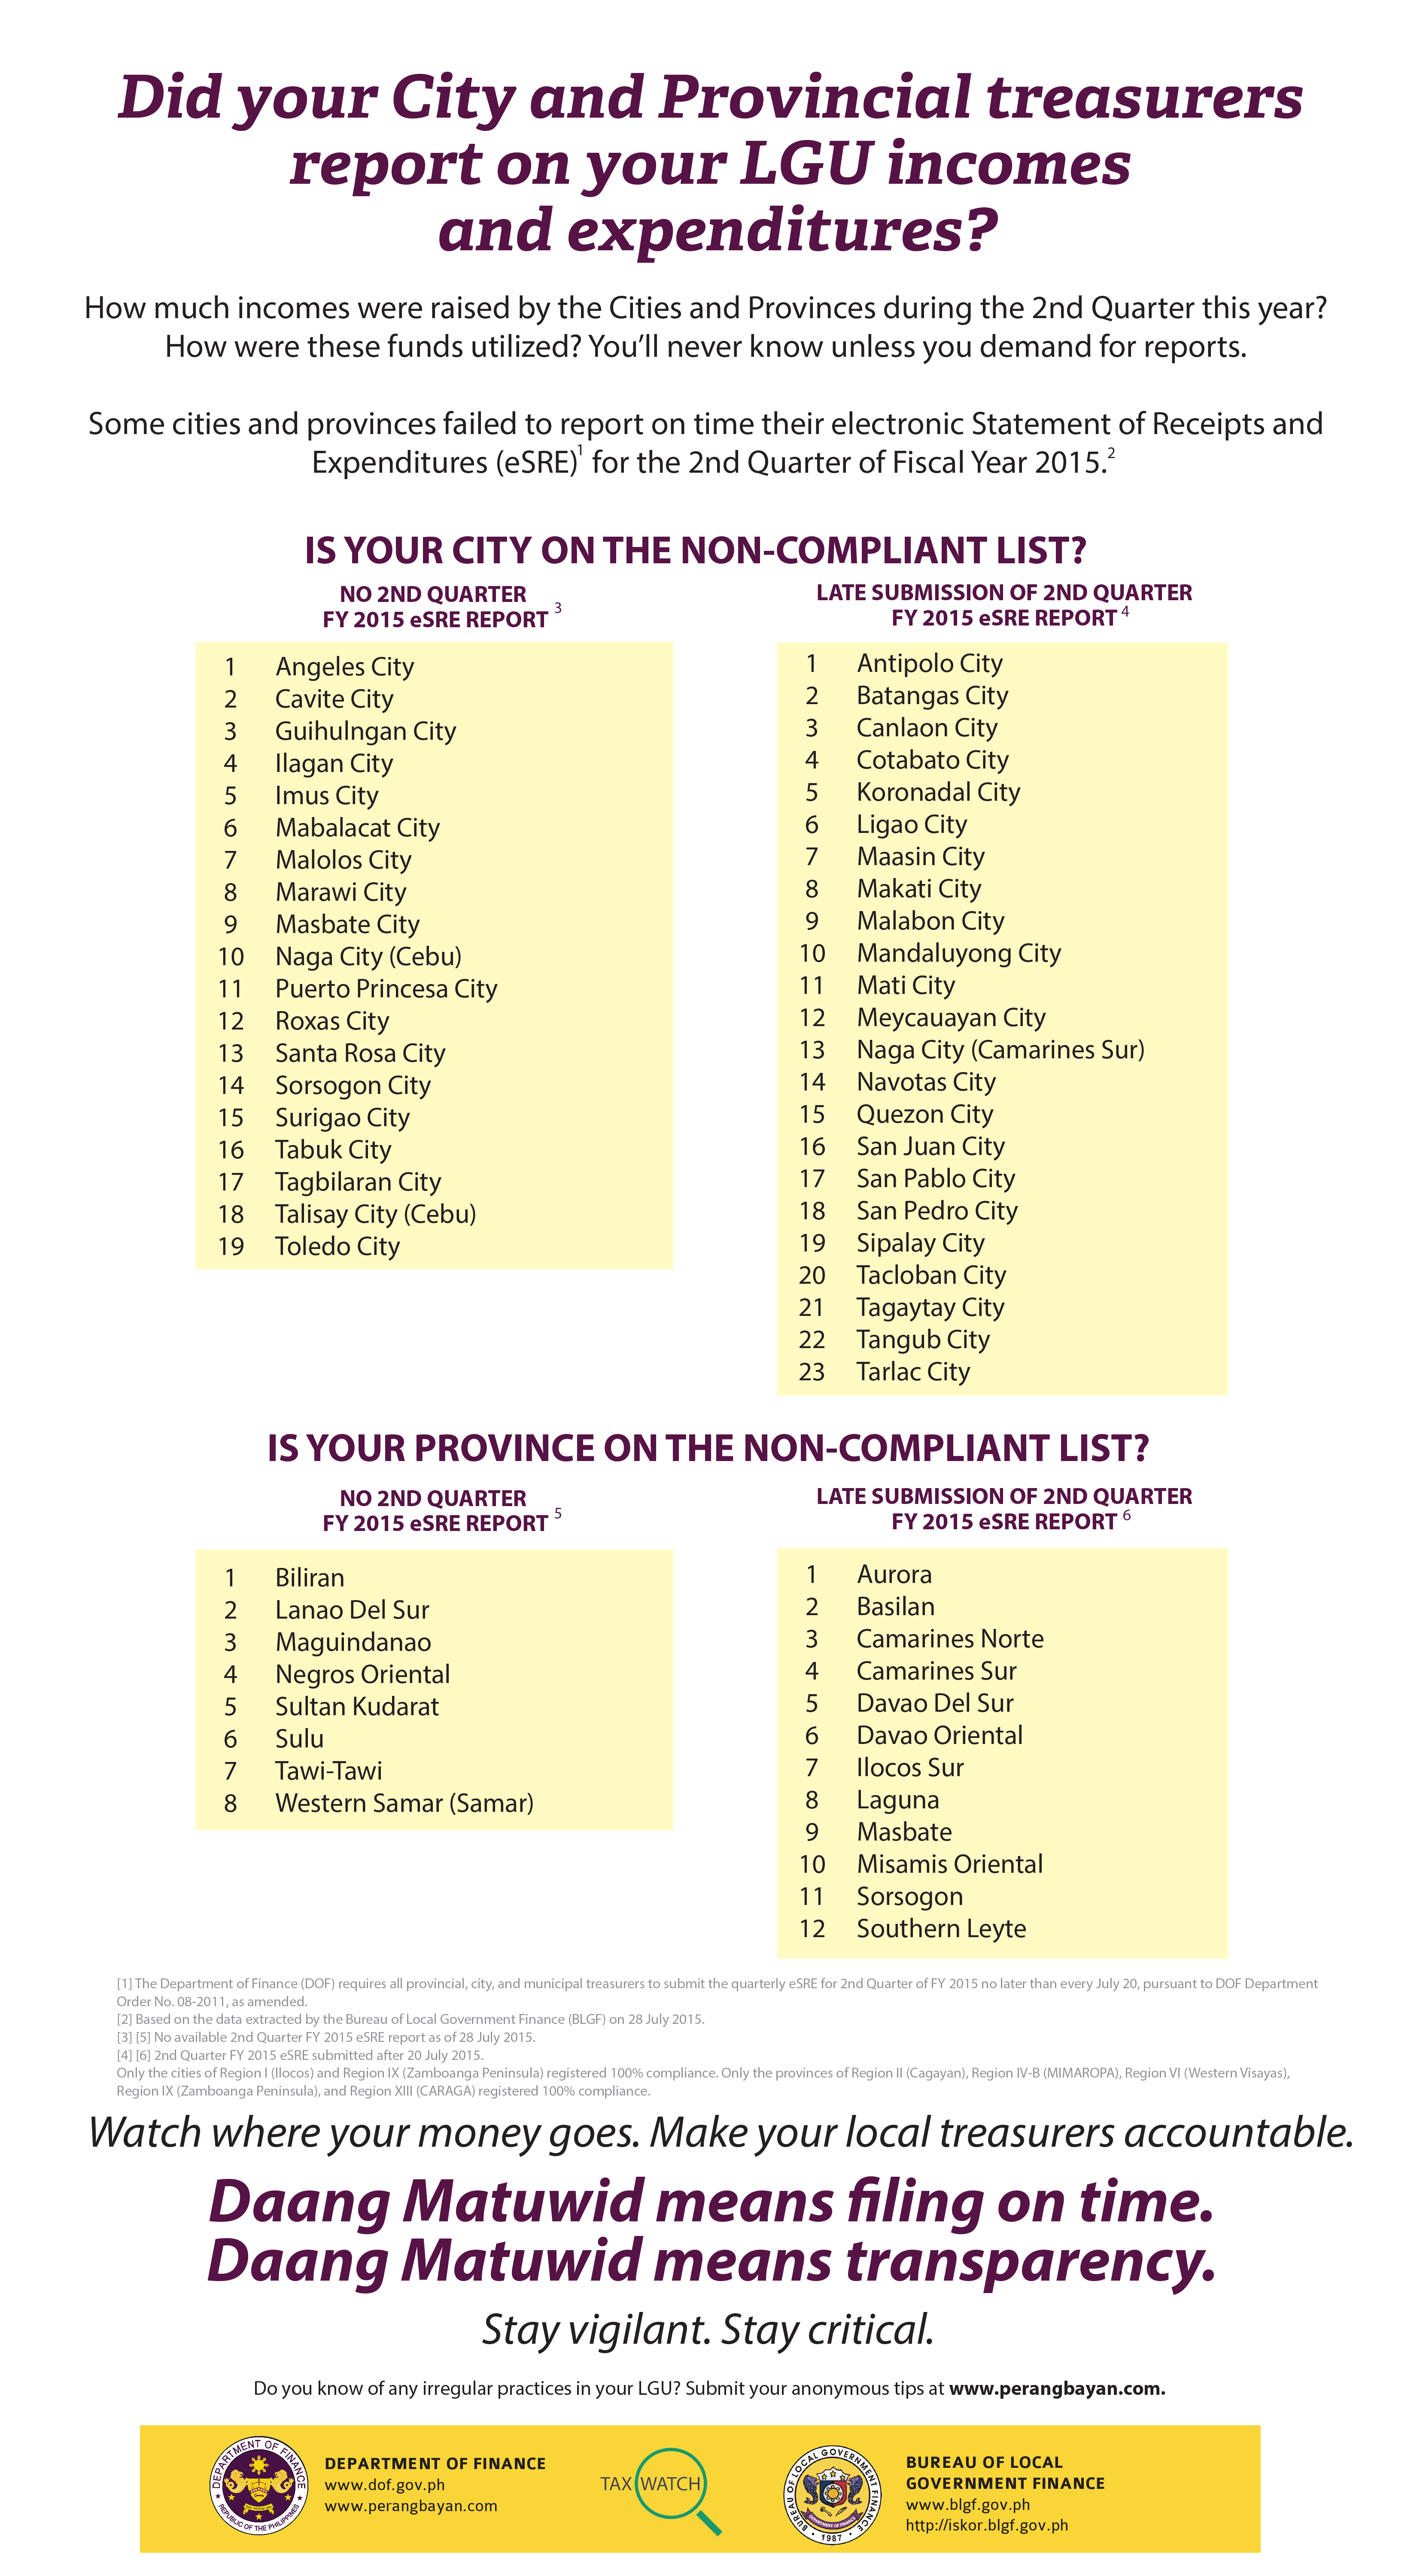 Tax Watch 100 Non-complying treasurers (cities and provinces)